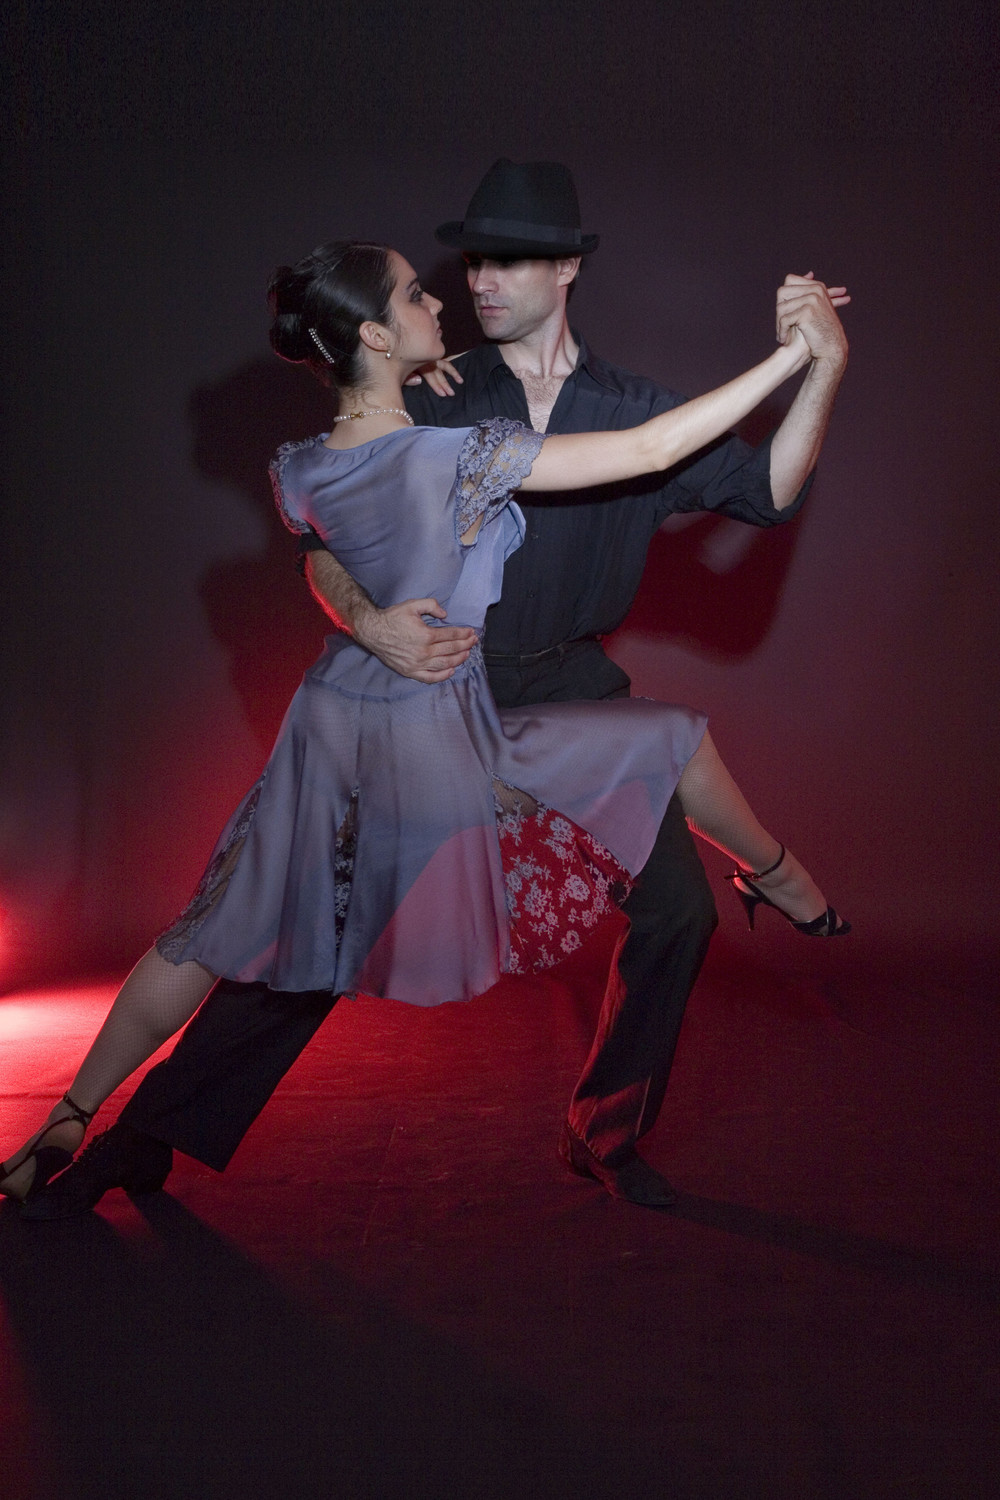 Tango Buenos Aires dances their way onto the Madison Theatre stage on Oct. 15.